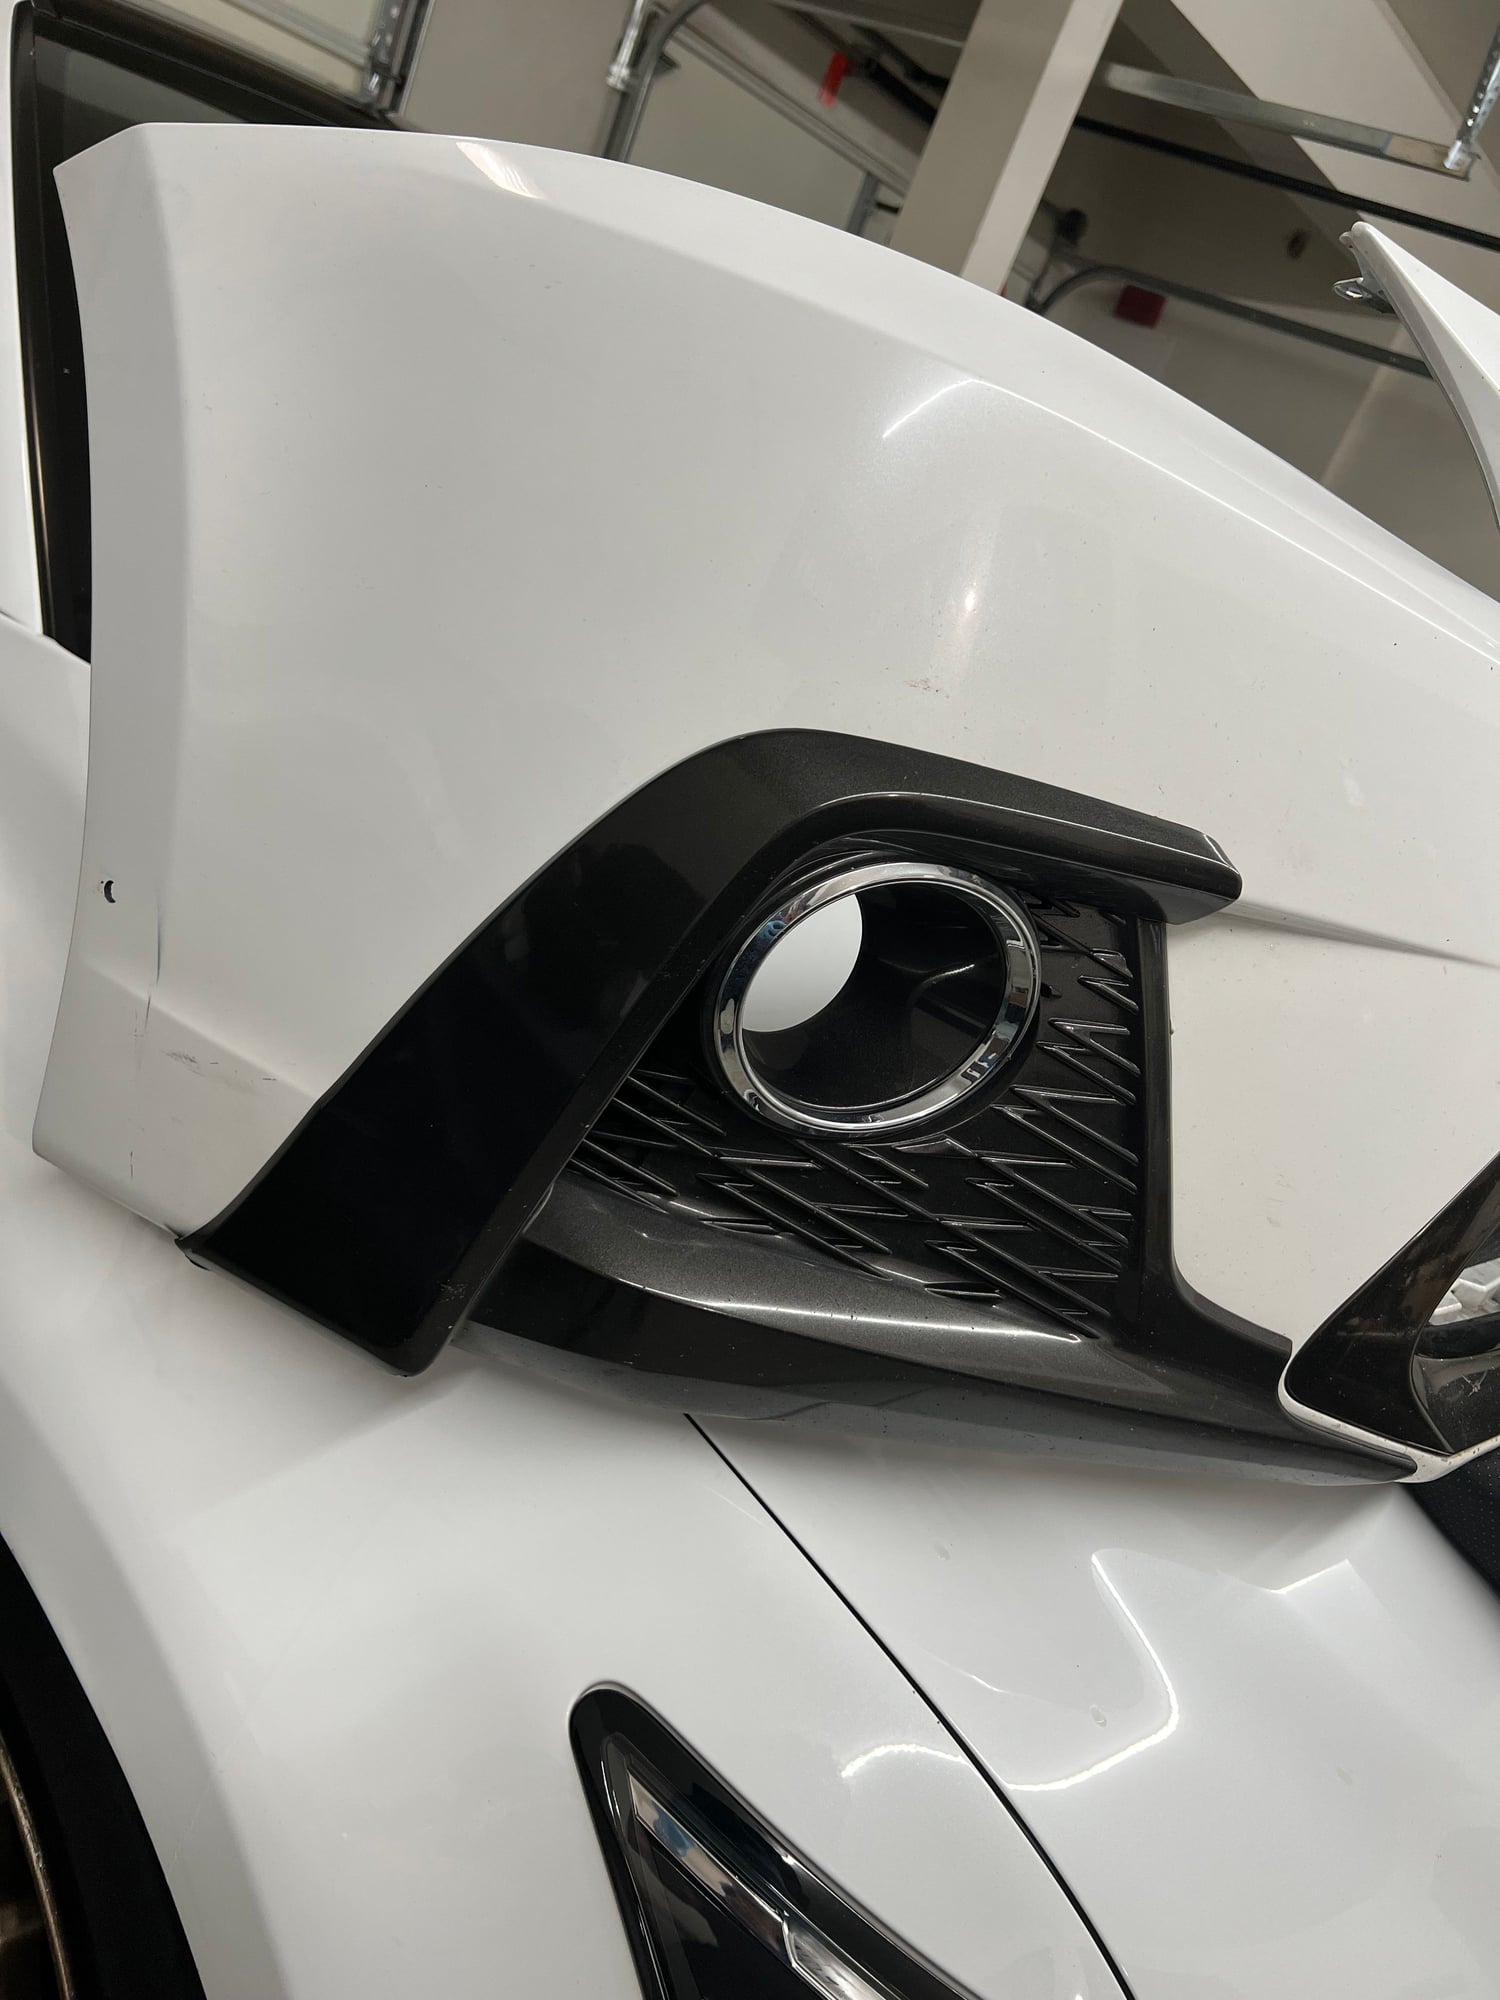 Exterior Body Parts - 2018-2020 F-Sport Fog Lamp Bezels, Black Chrome Mouldings, Front Bumper - Used - 2011 to 2020 Lexus CT200h - Moreno Valley, CA 92555, United States